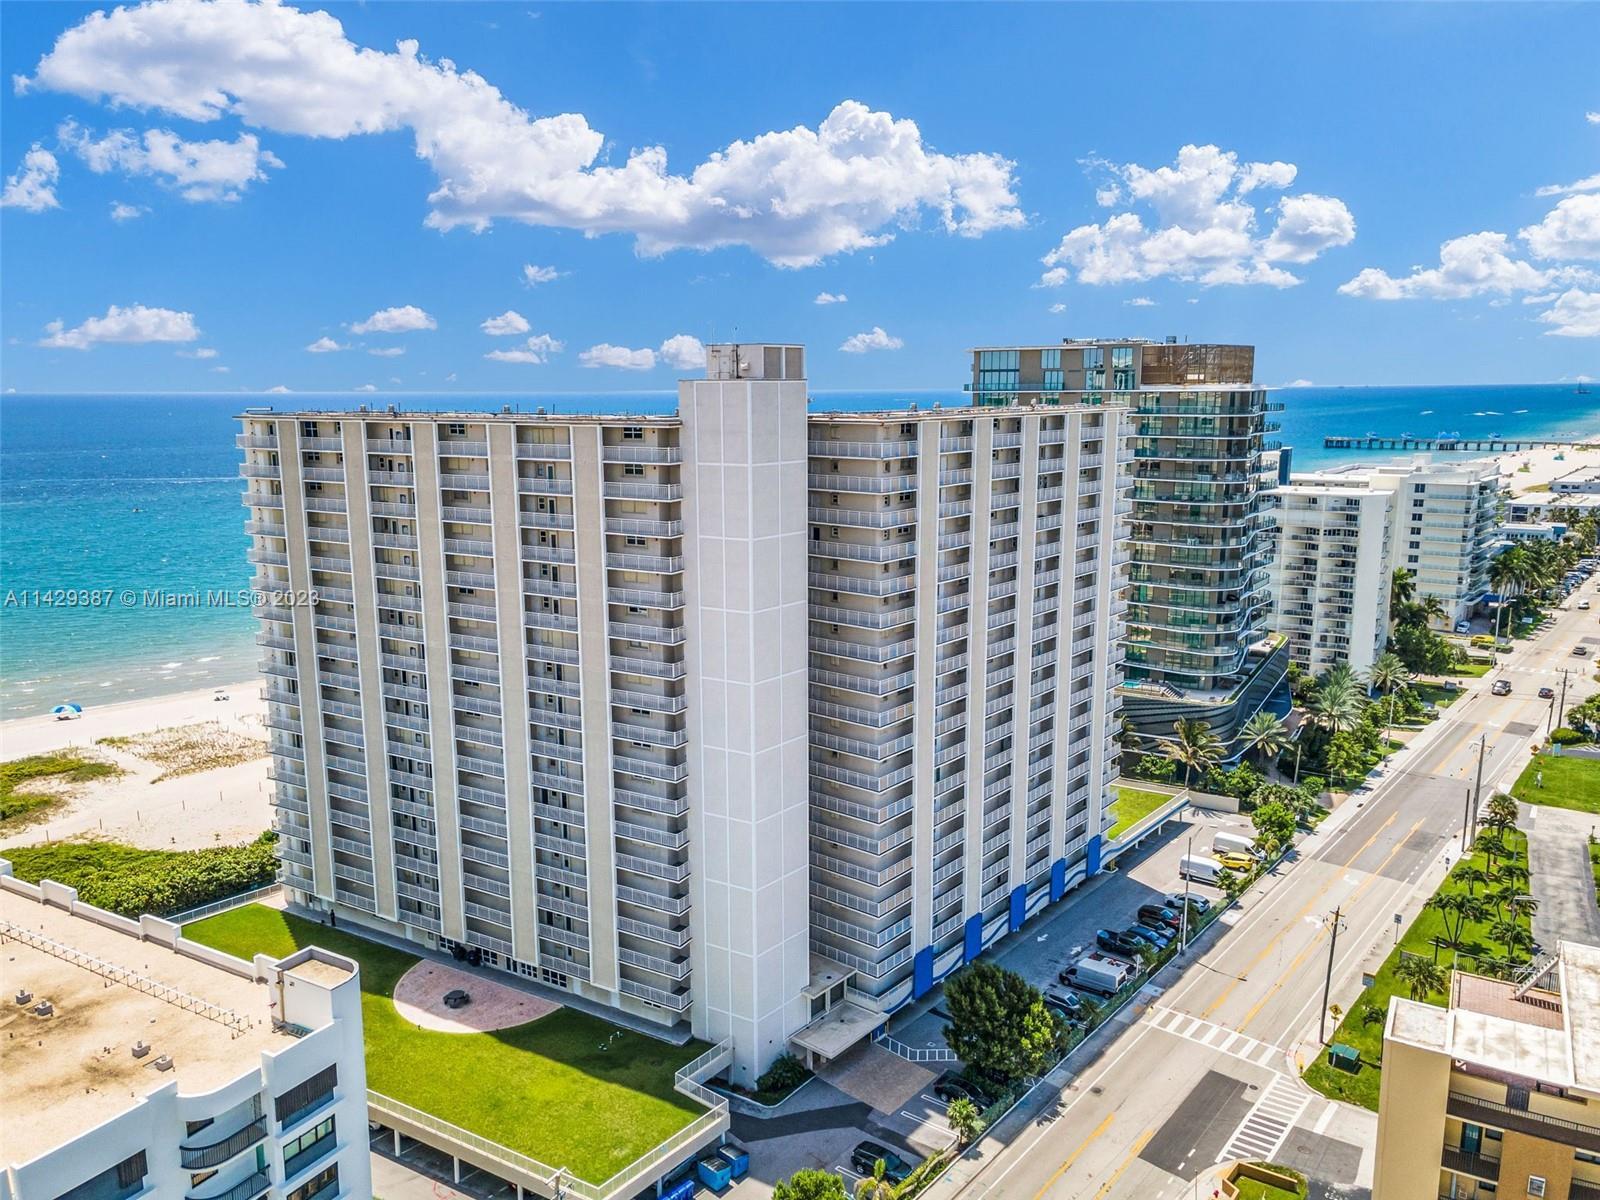 Unrivaled beachfront living awaits! This incredible 2 bedroom and 2 bathroom condo at Admiralty Towe